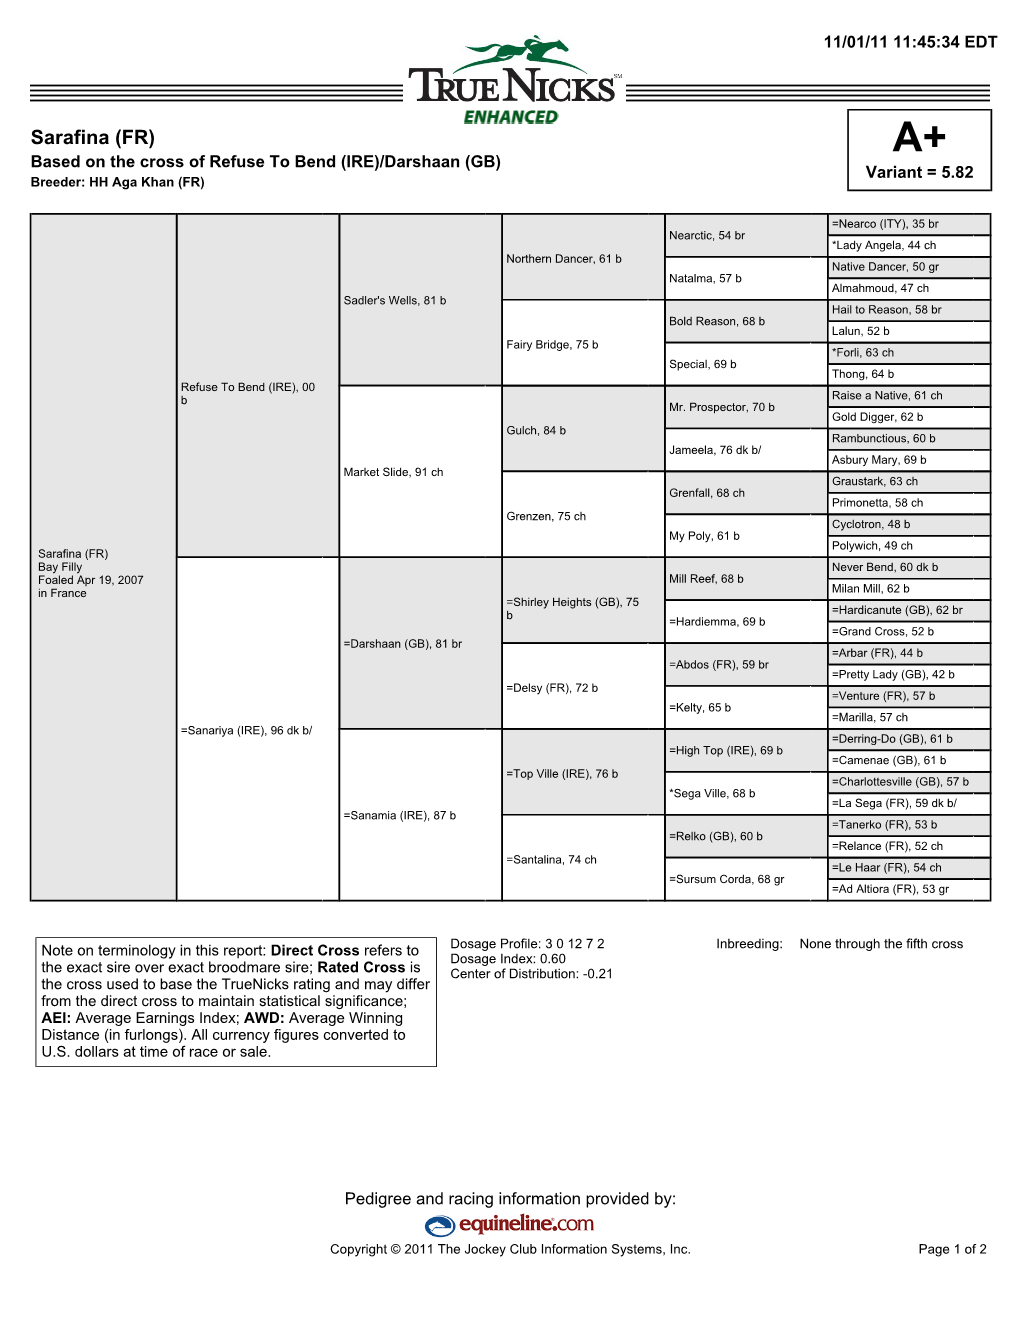 Sarafina (FR) A+ Based on the Cross of Refuse to Bend (IRE)/Darshaan (GB) Variant = 5.82 Breeder: HH Aga Khan (FR)